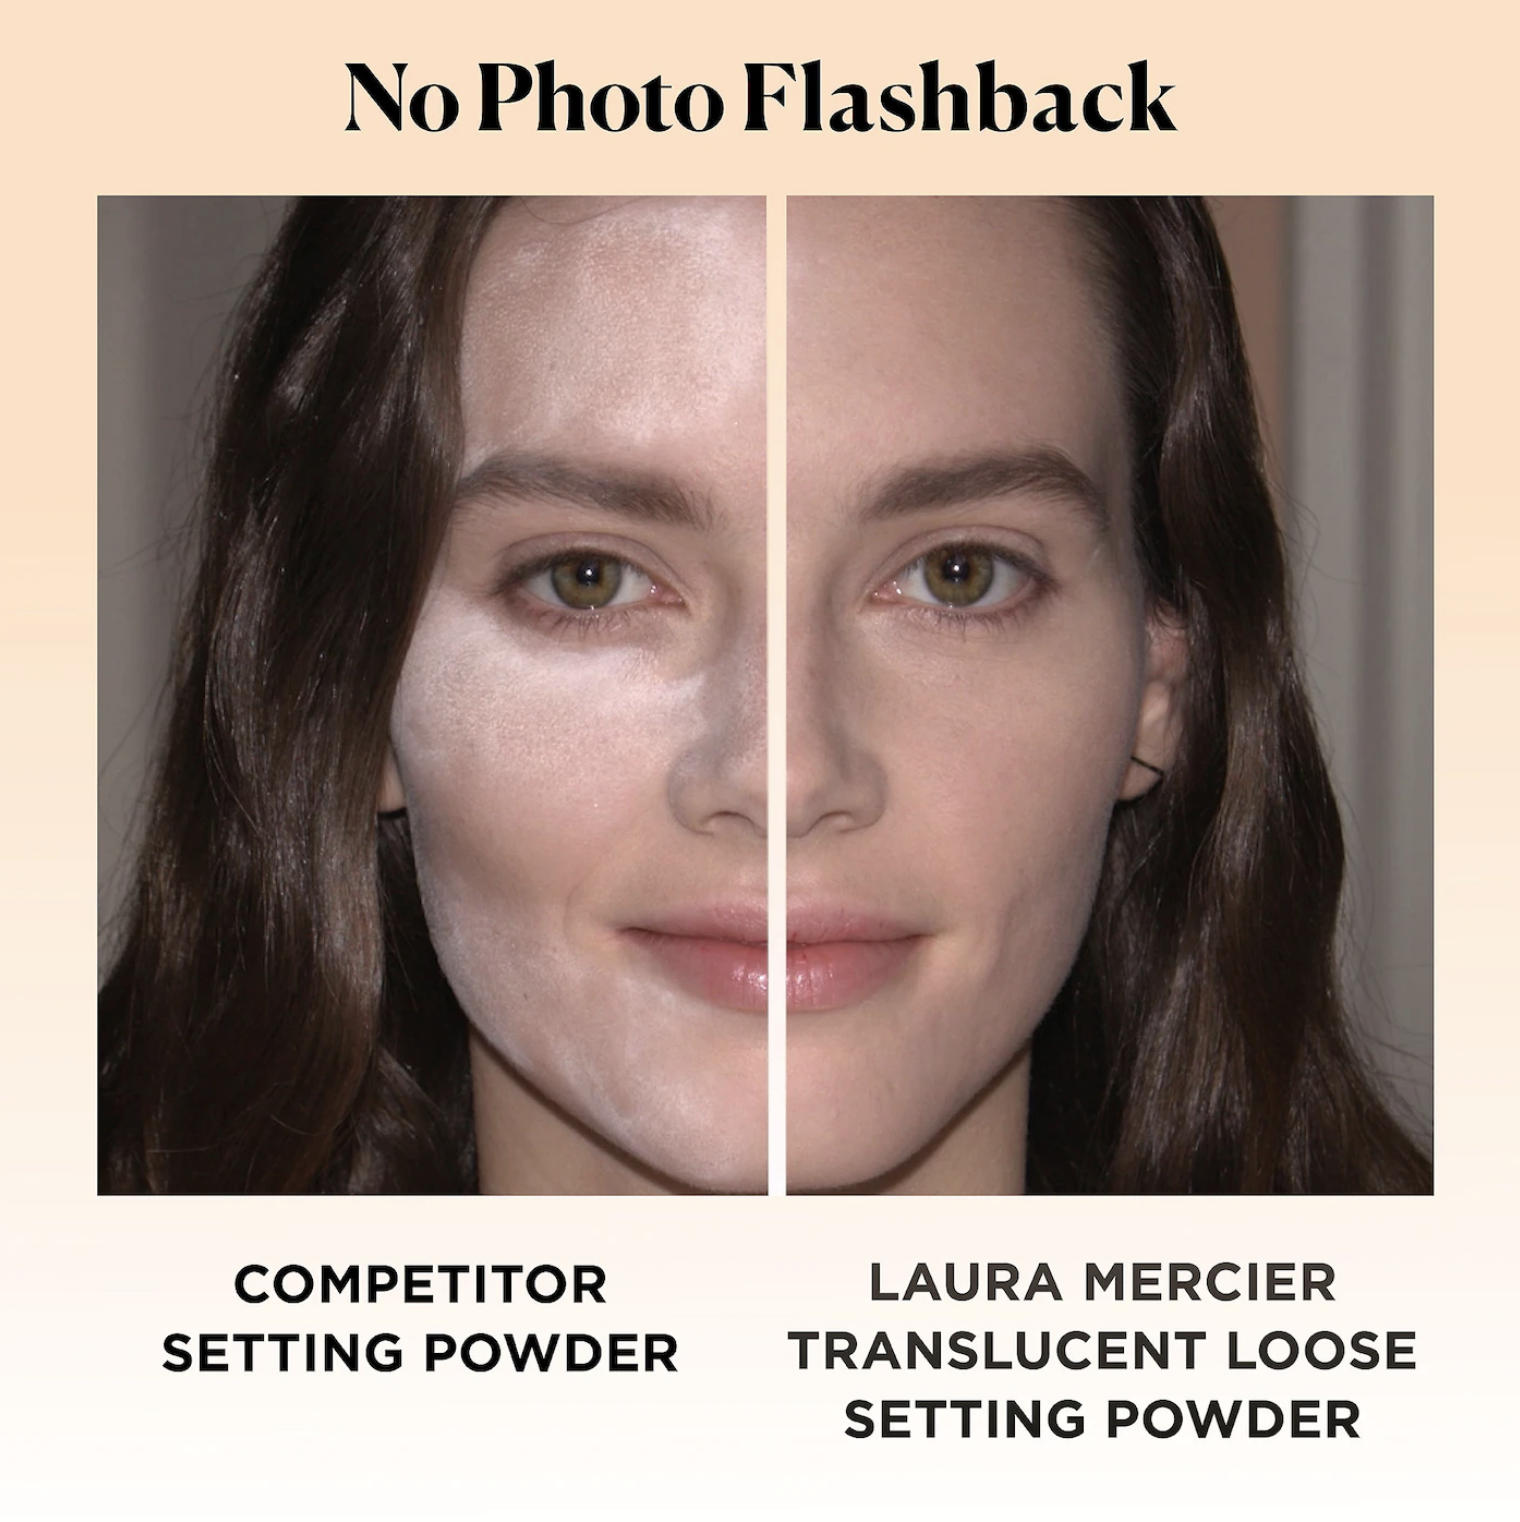 A competitive setting powder with flashback / A model posing without flashback while wearing the product